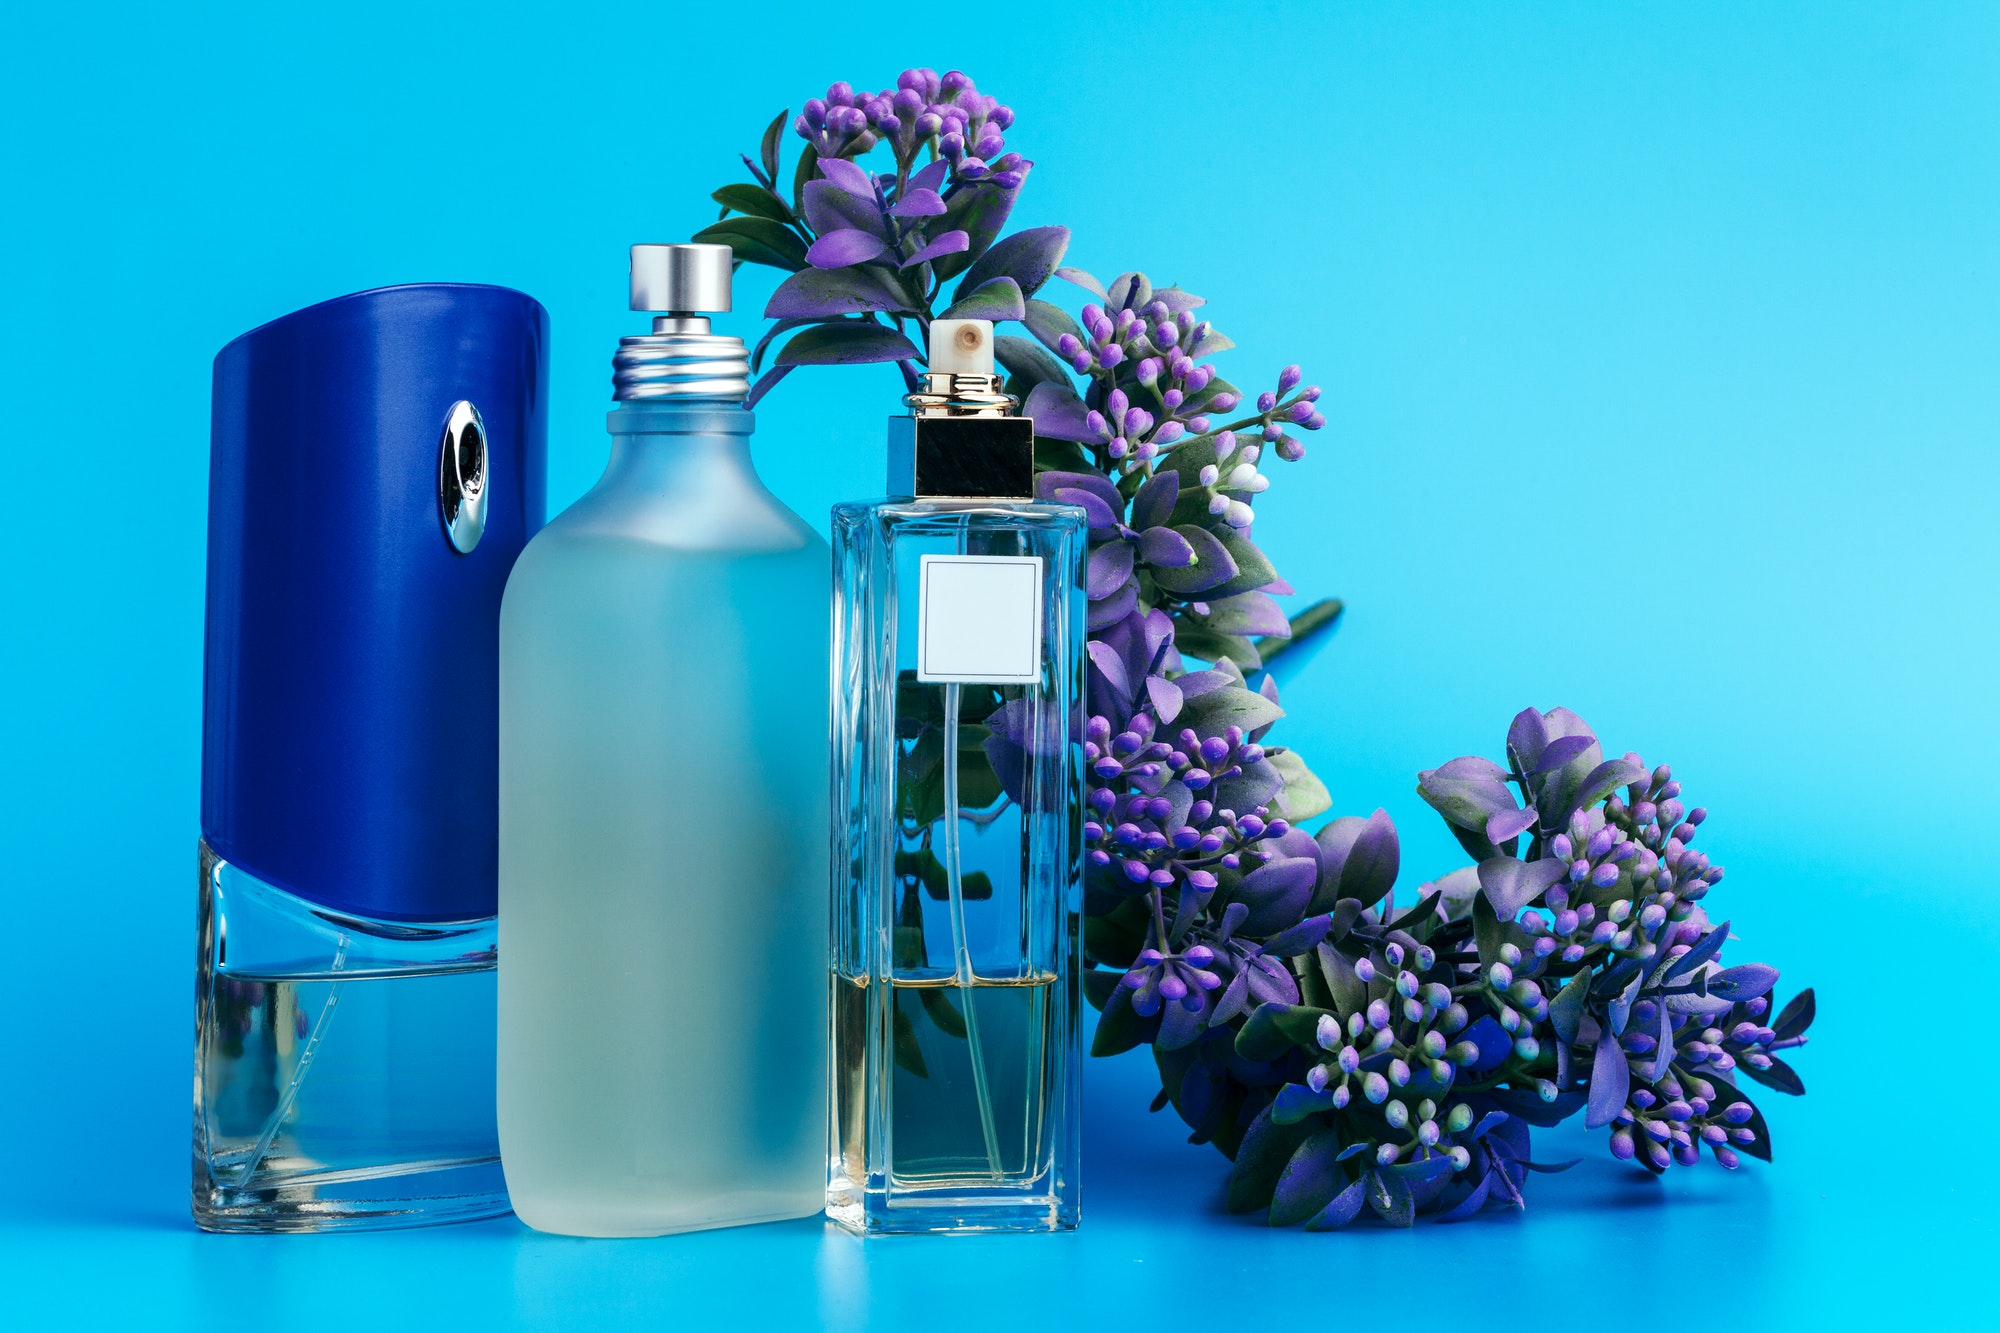 Perfume bottles with flowers on a light blue background